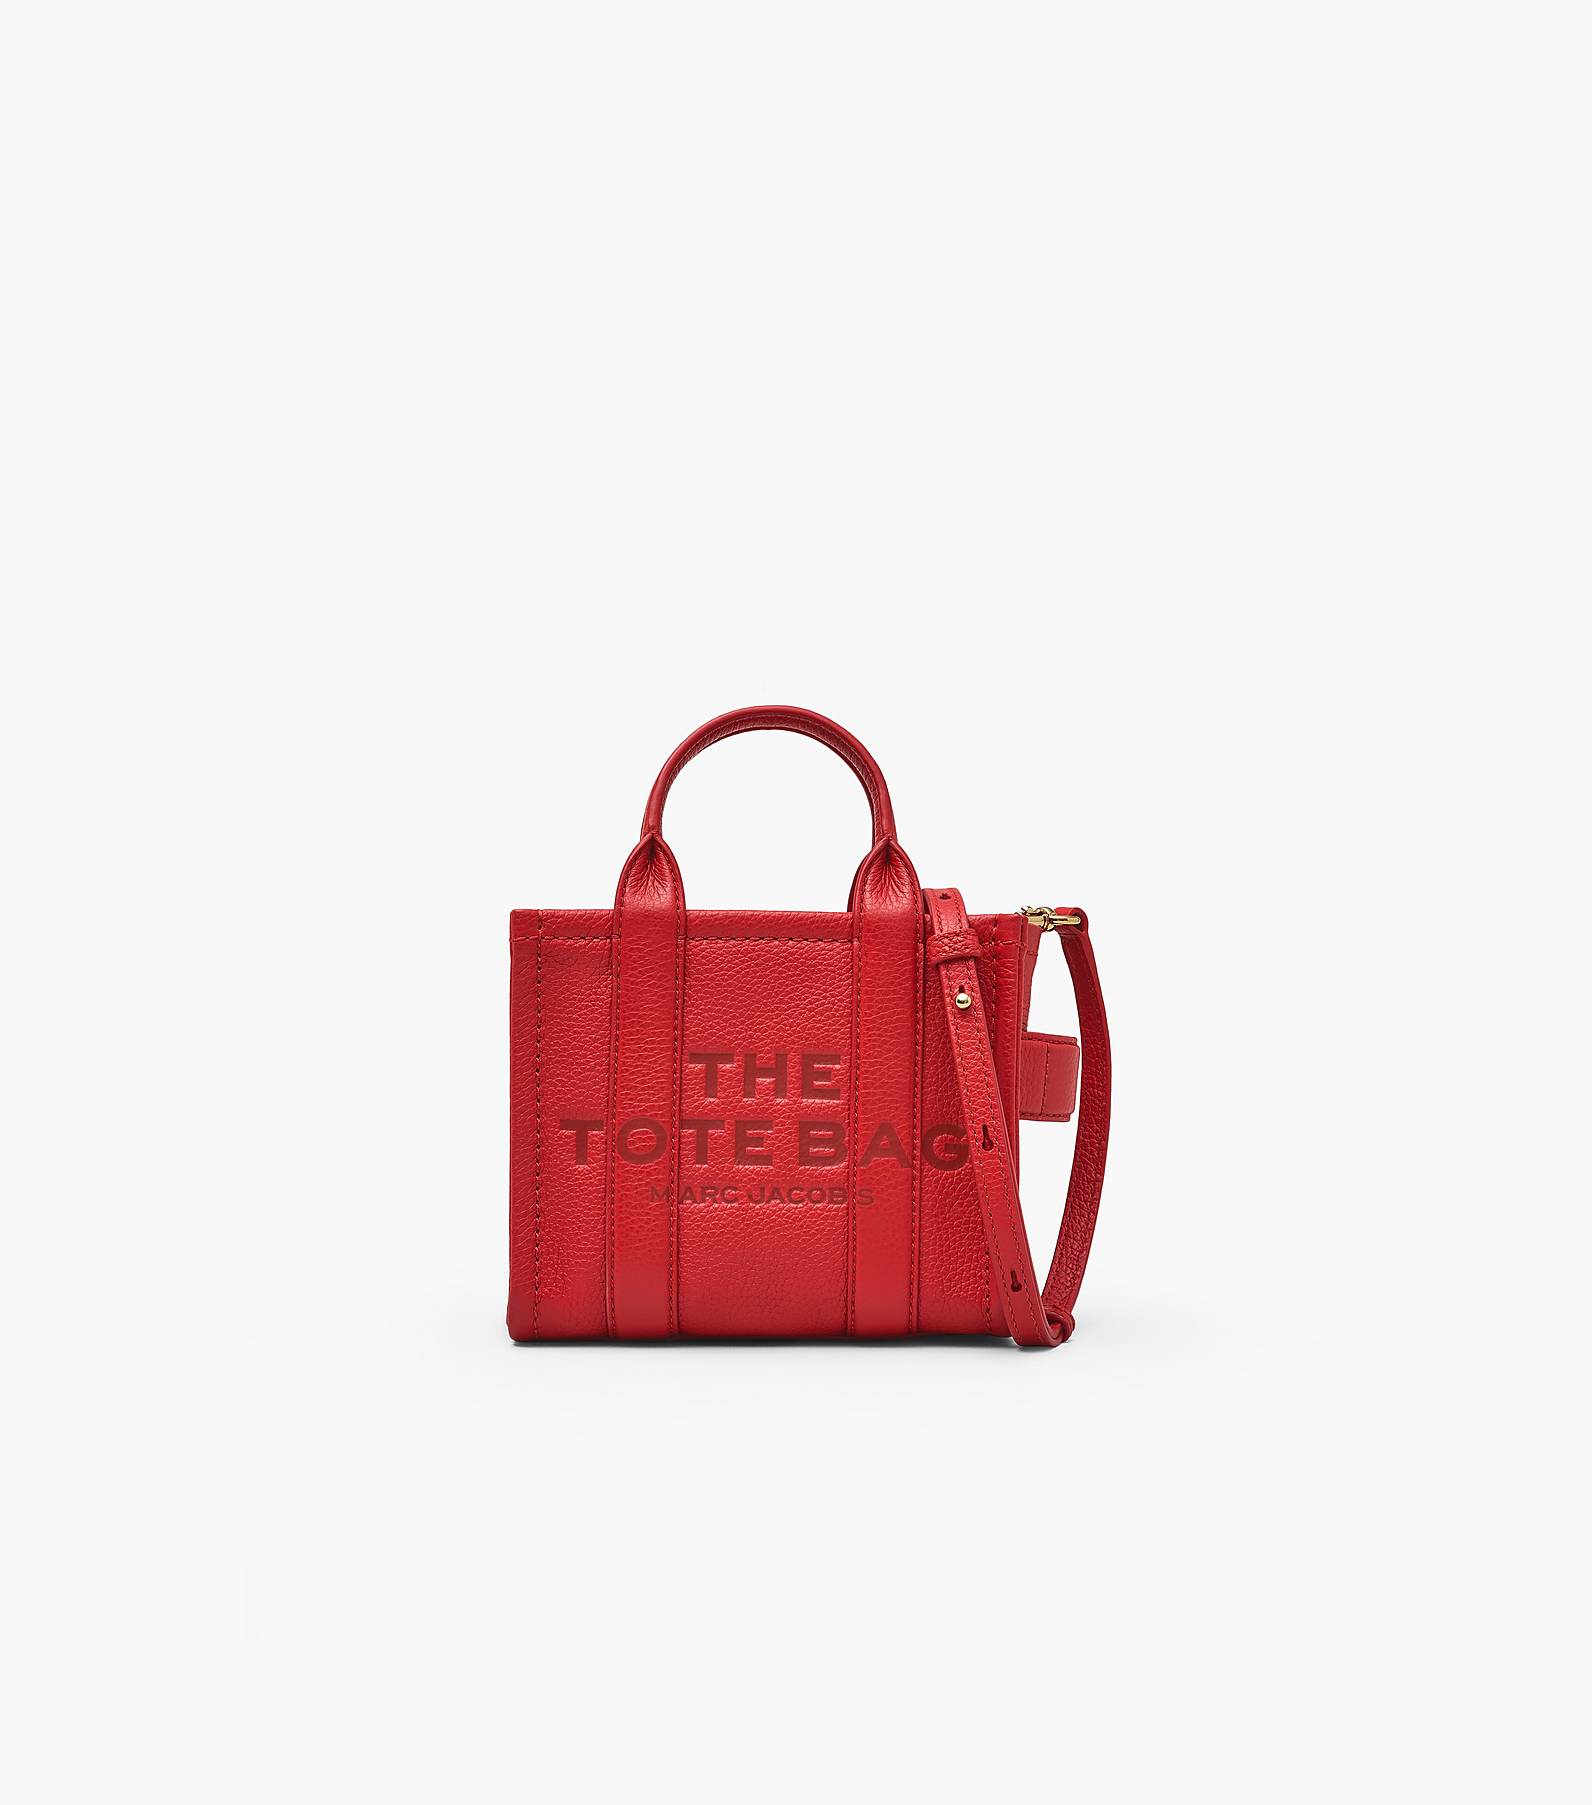 THE LEATHER CROSSBODY TOTE BAG